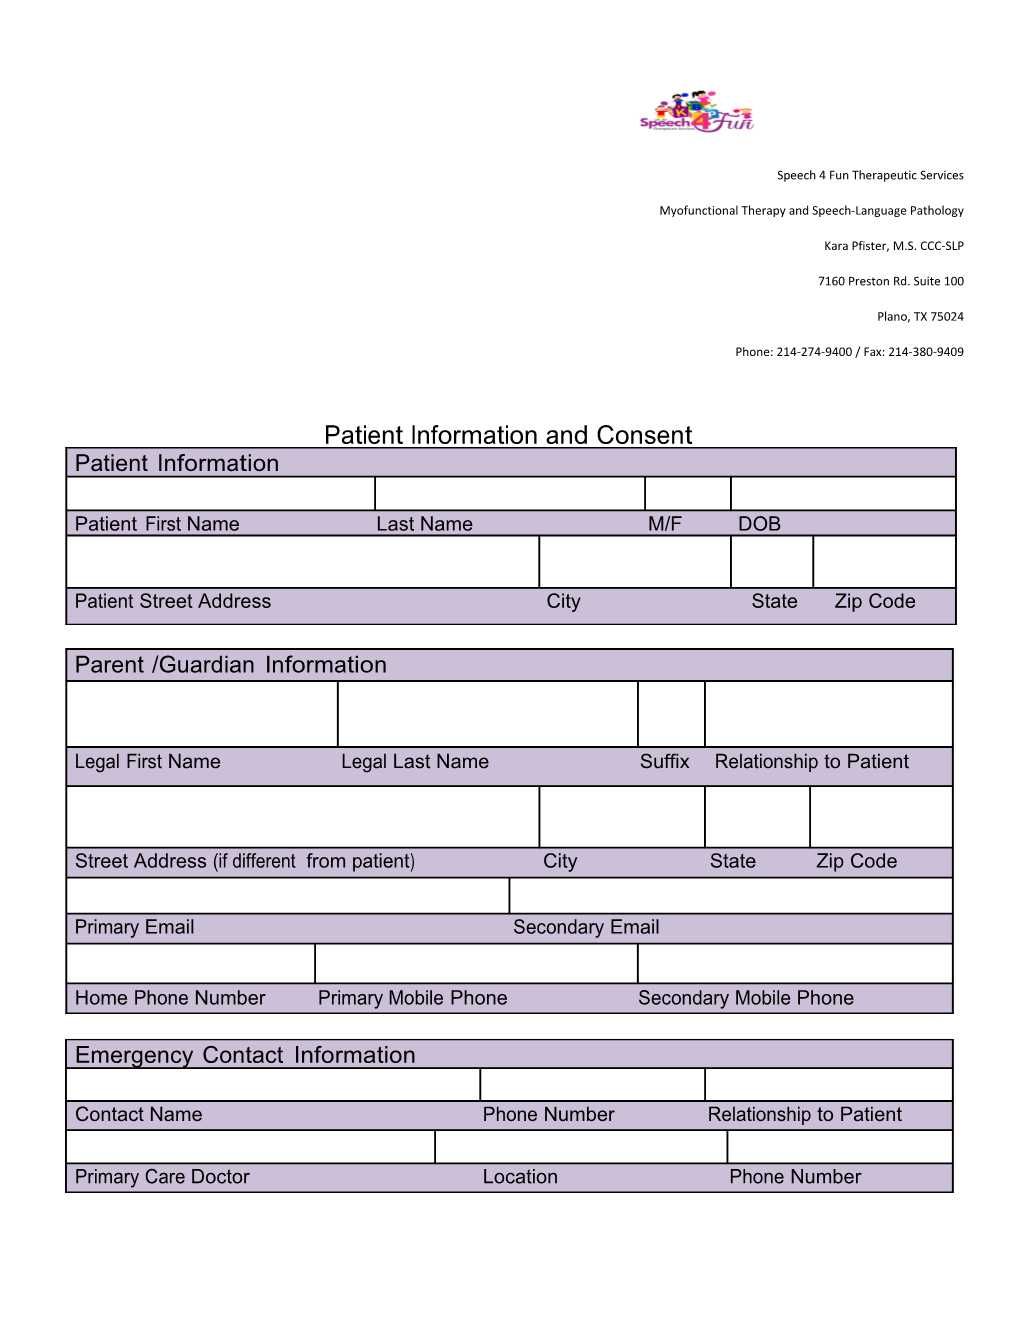 Patient Information and Consent